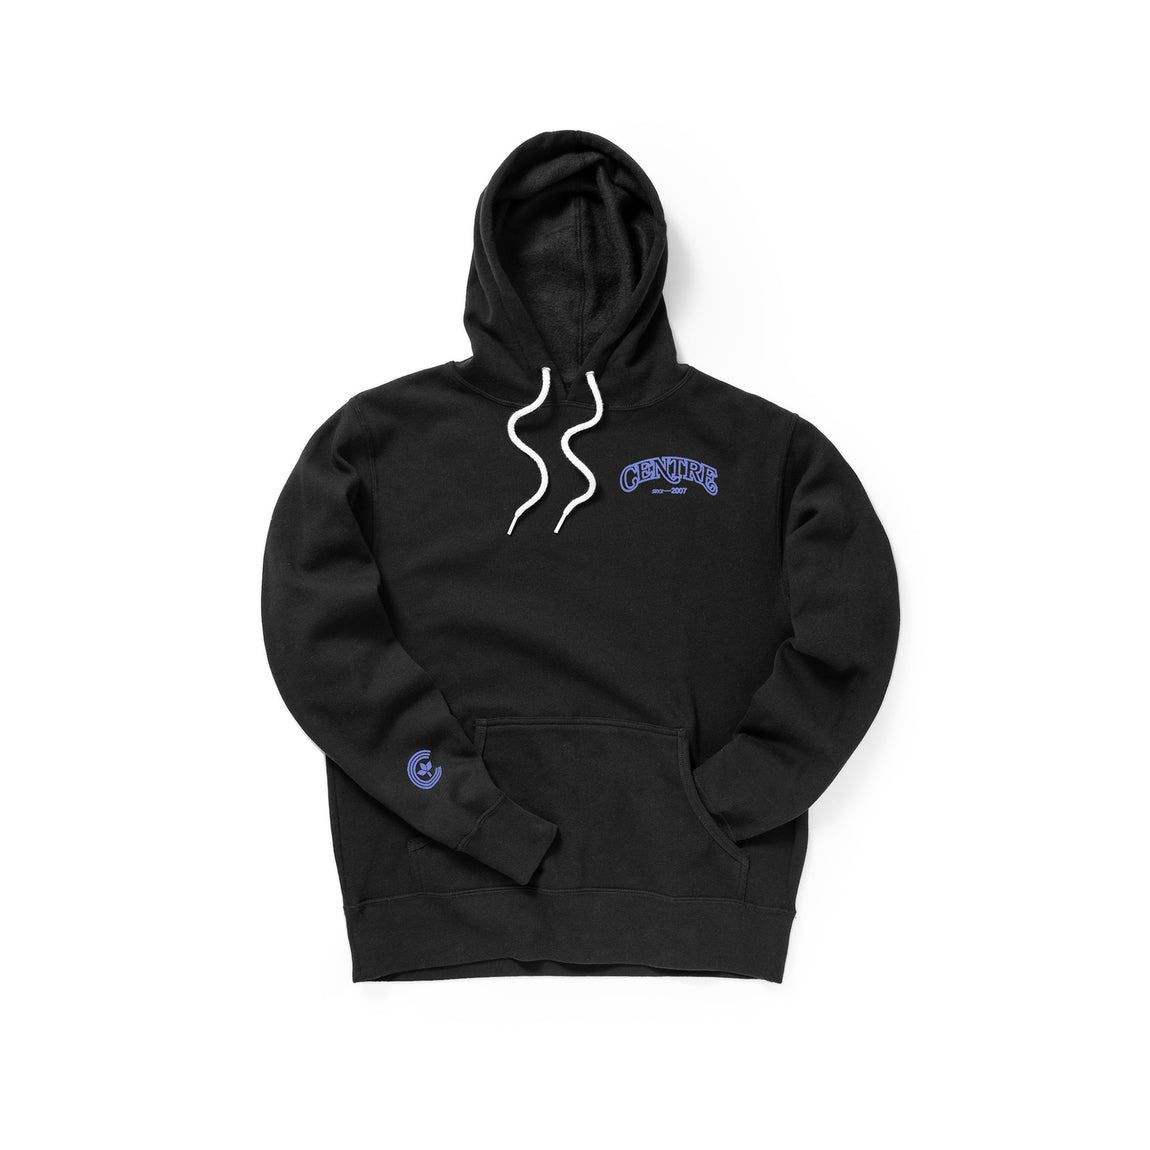 Centre Arch Pullover Hoodie (Black) - Centre Arch Pullover Hoodie (Black) - 